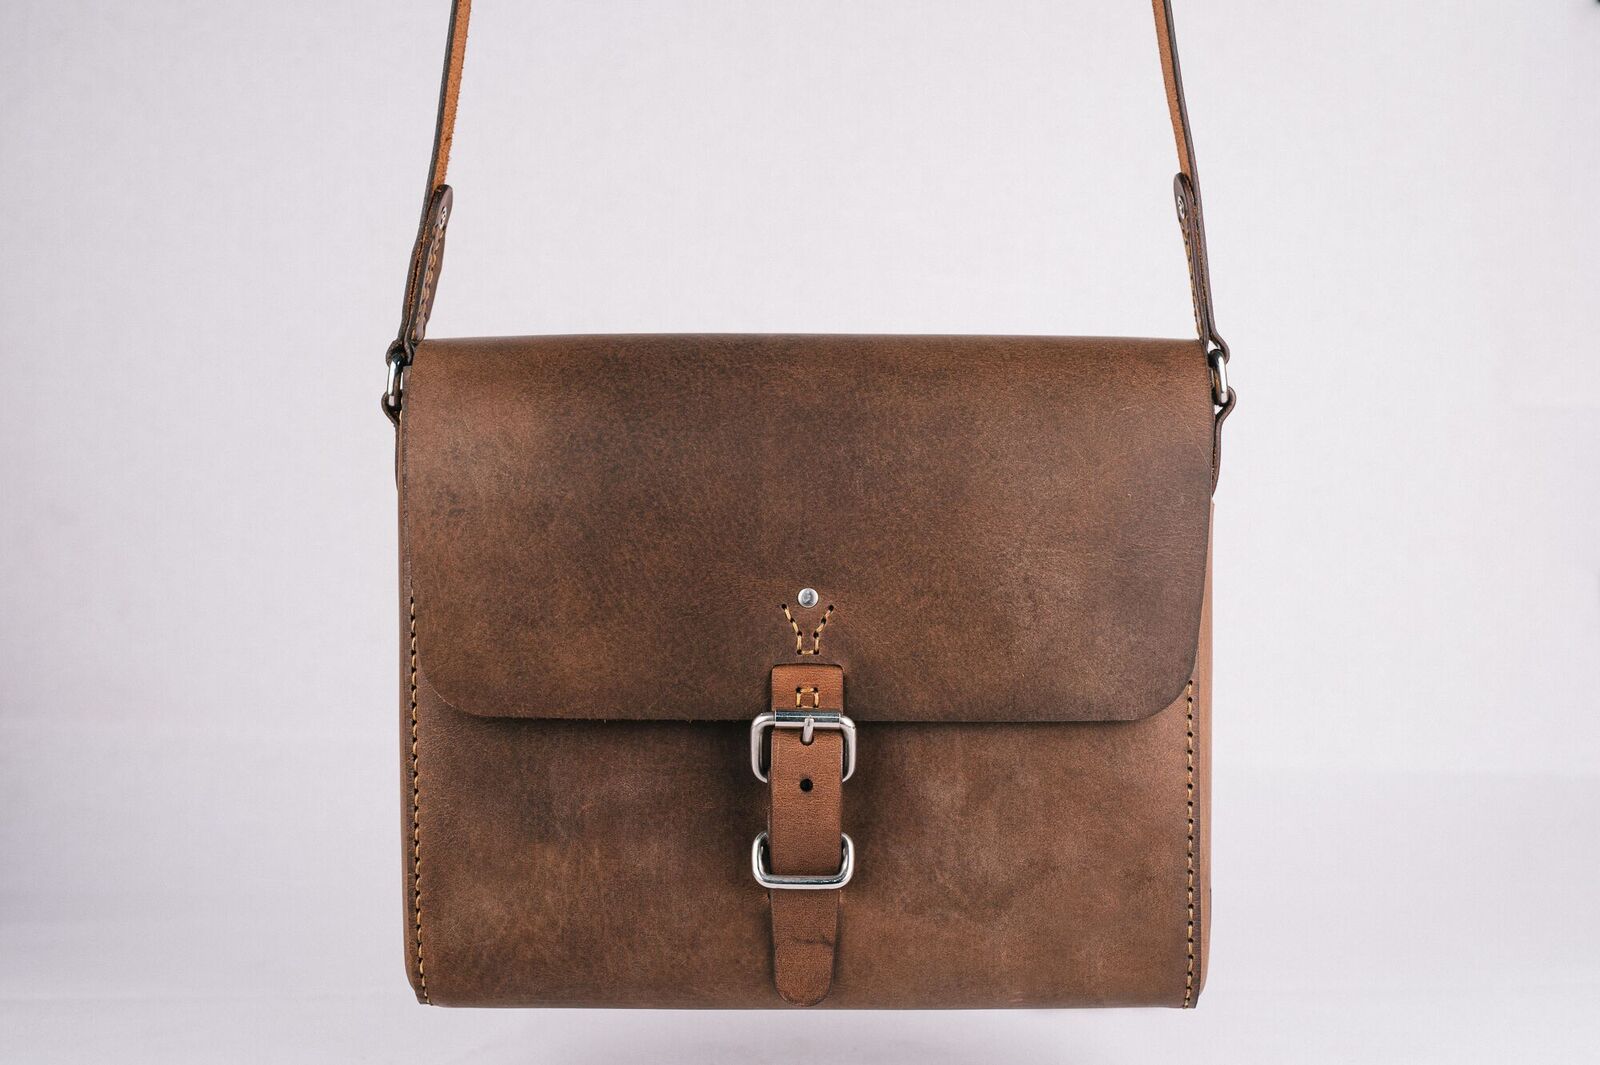 The Loyal Workshop The Companion Ethical Leather Satchel